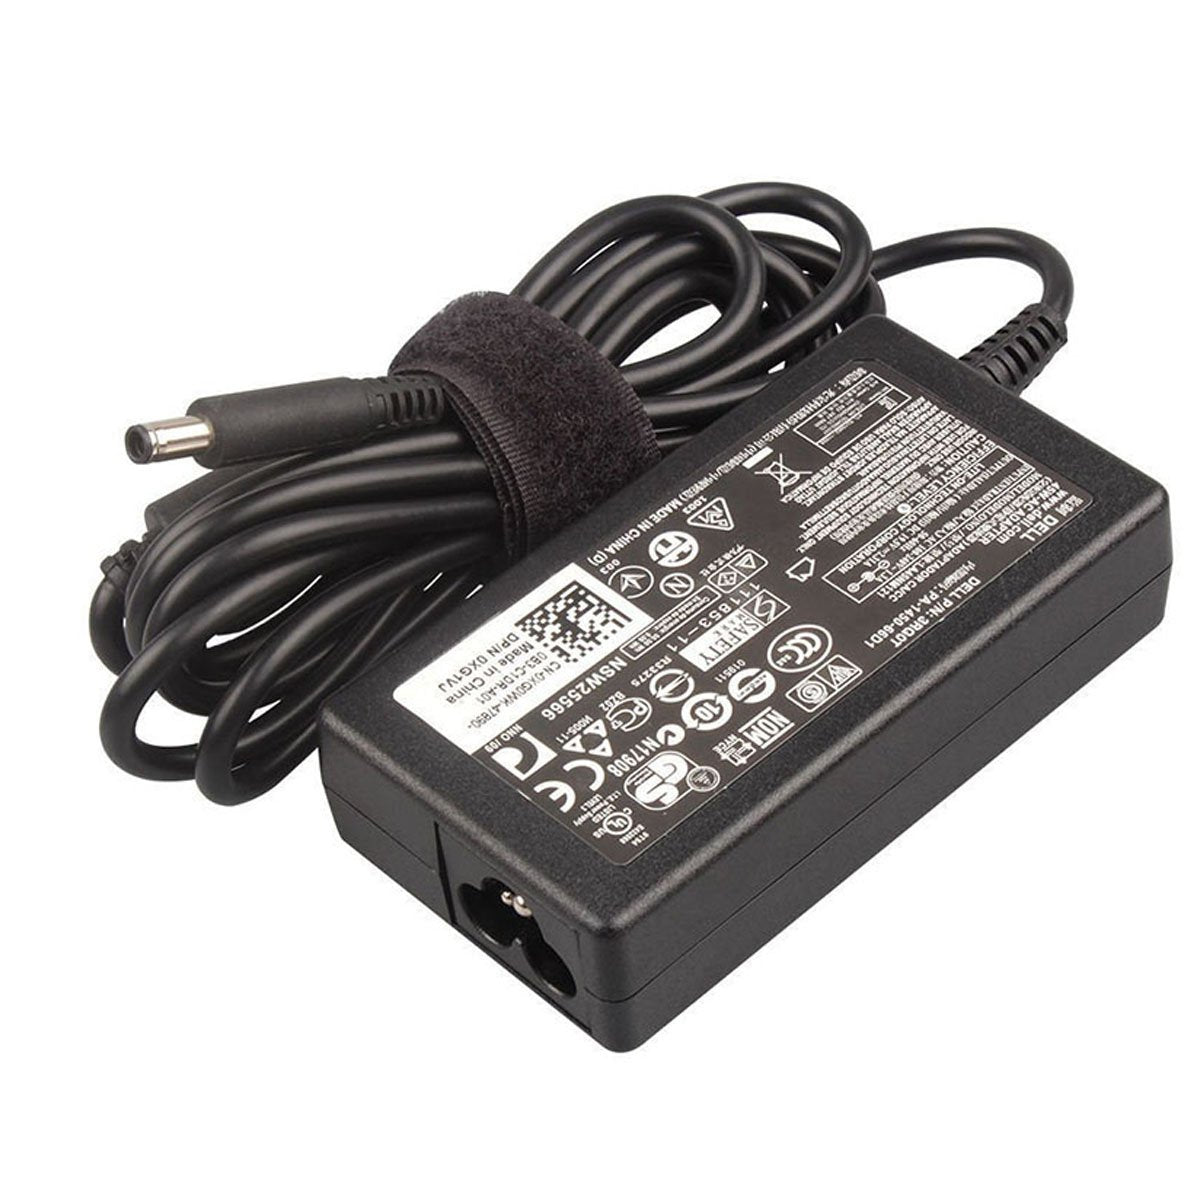 Dell Inspiron 15 5579 Original 45W Laptop Charger Adapter With Power Cord 19.5V 4.5mm Pin